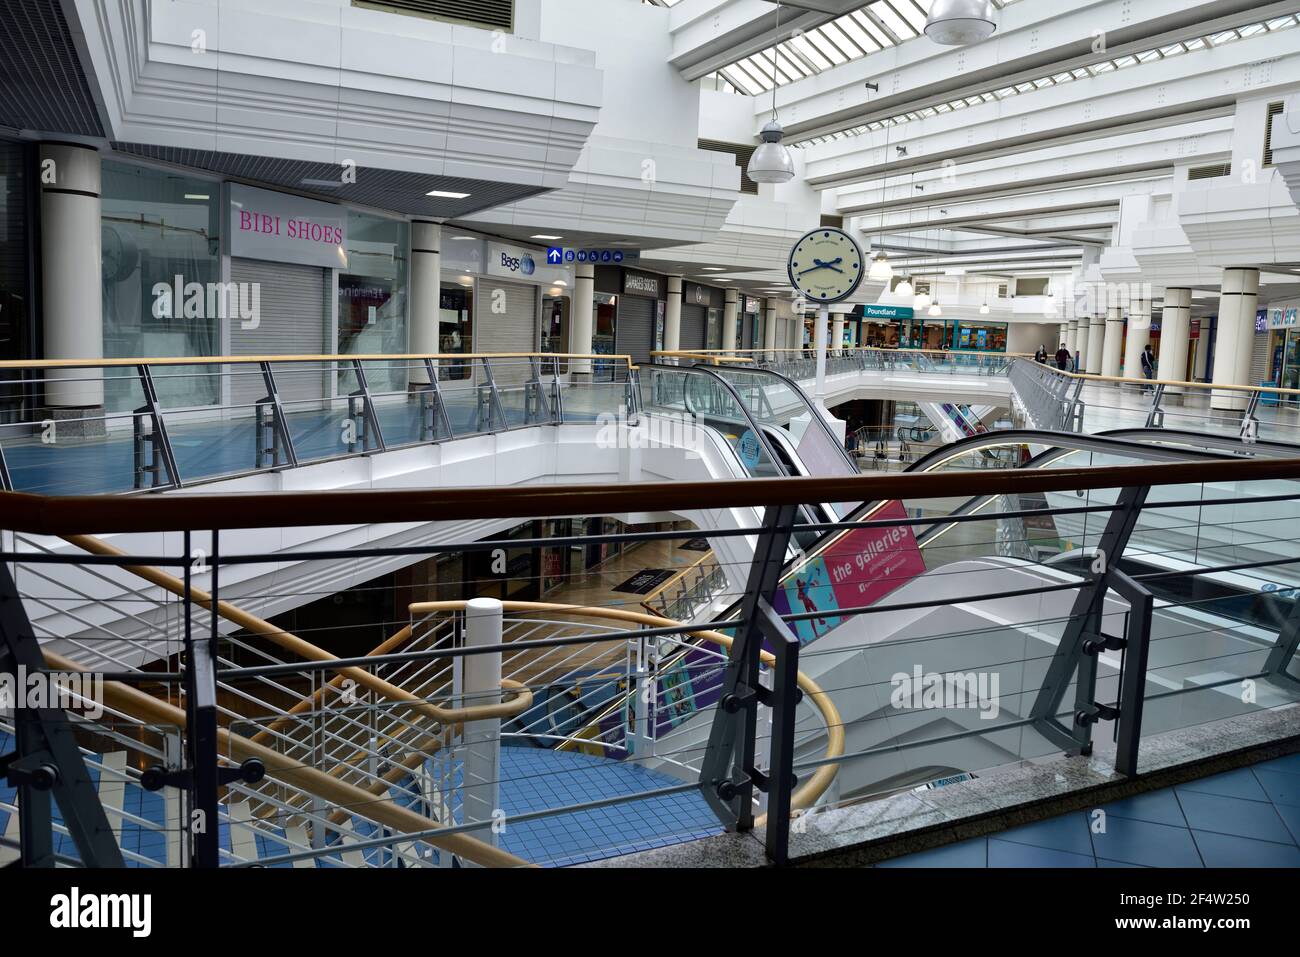 Inside large normally busy shopping centre nearly empty mid afternoon weekend with shops closed during lockdown due to Covid-19 pandemic, UK Stock Photo